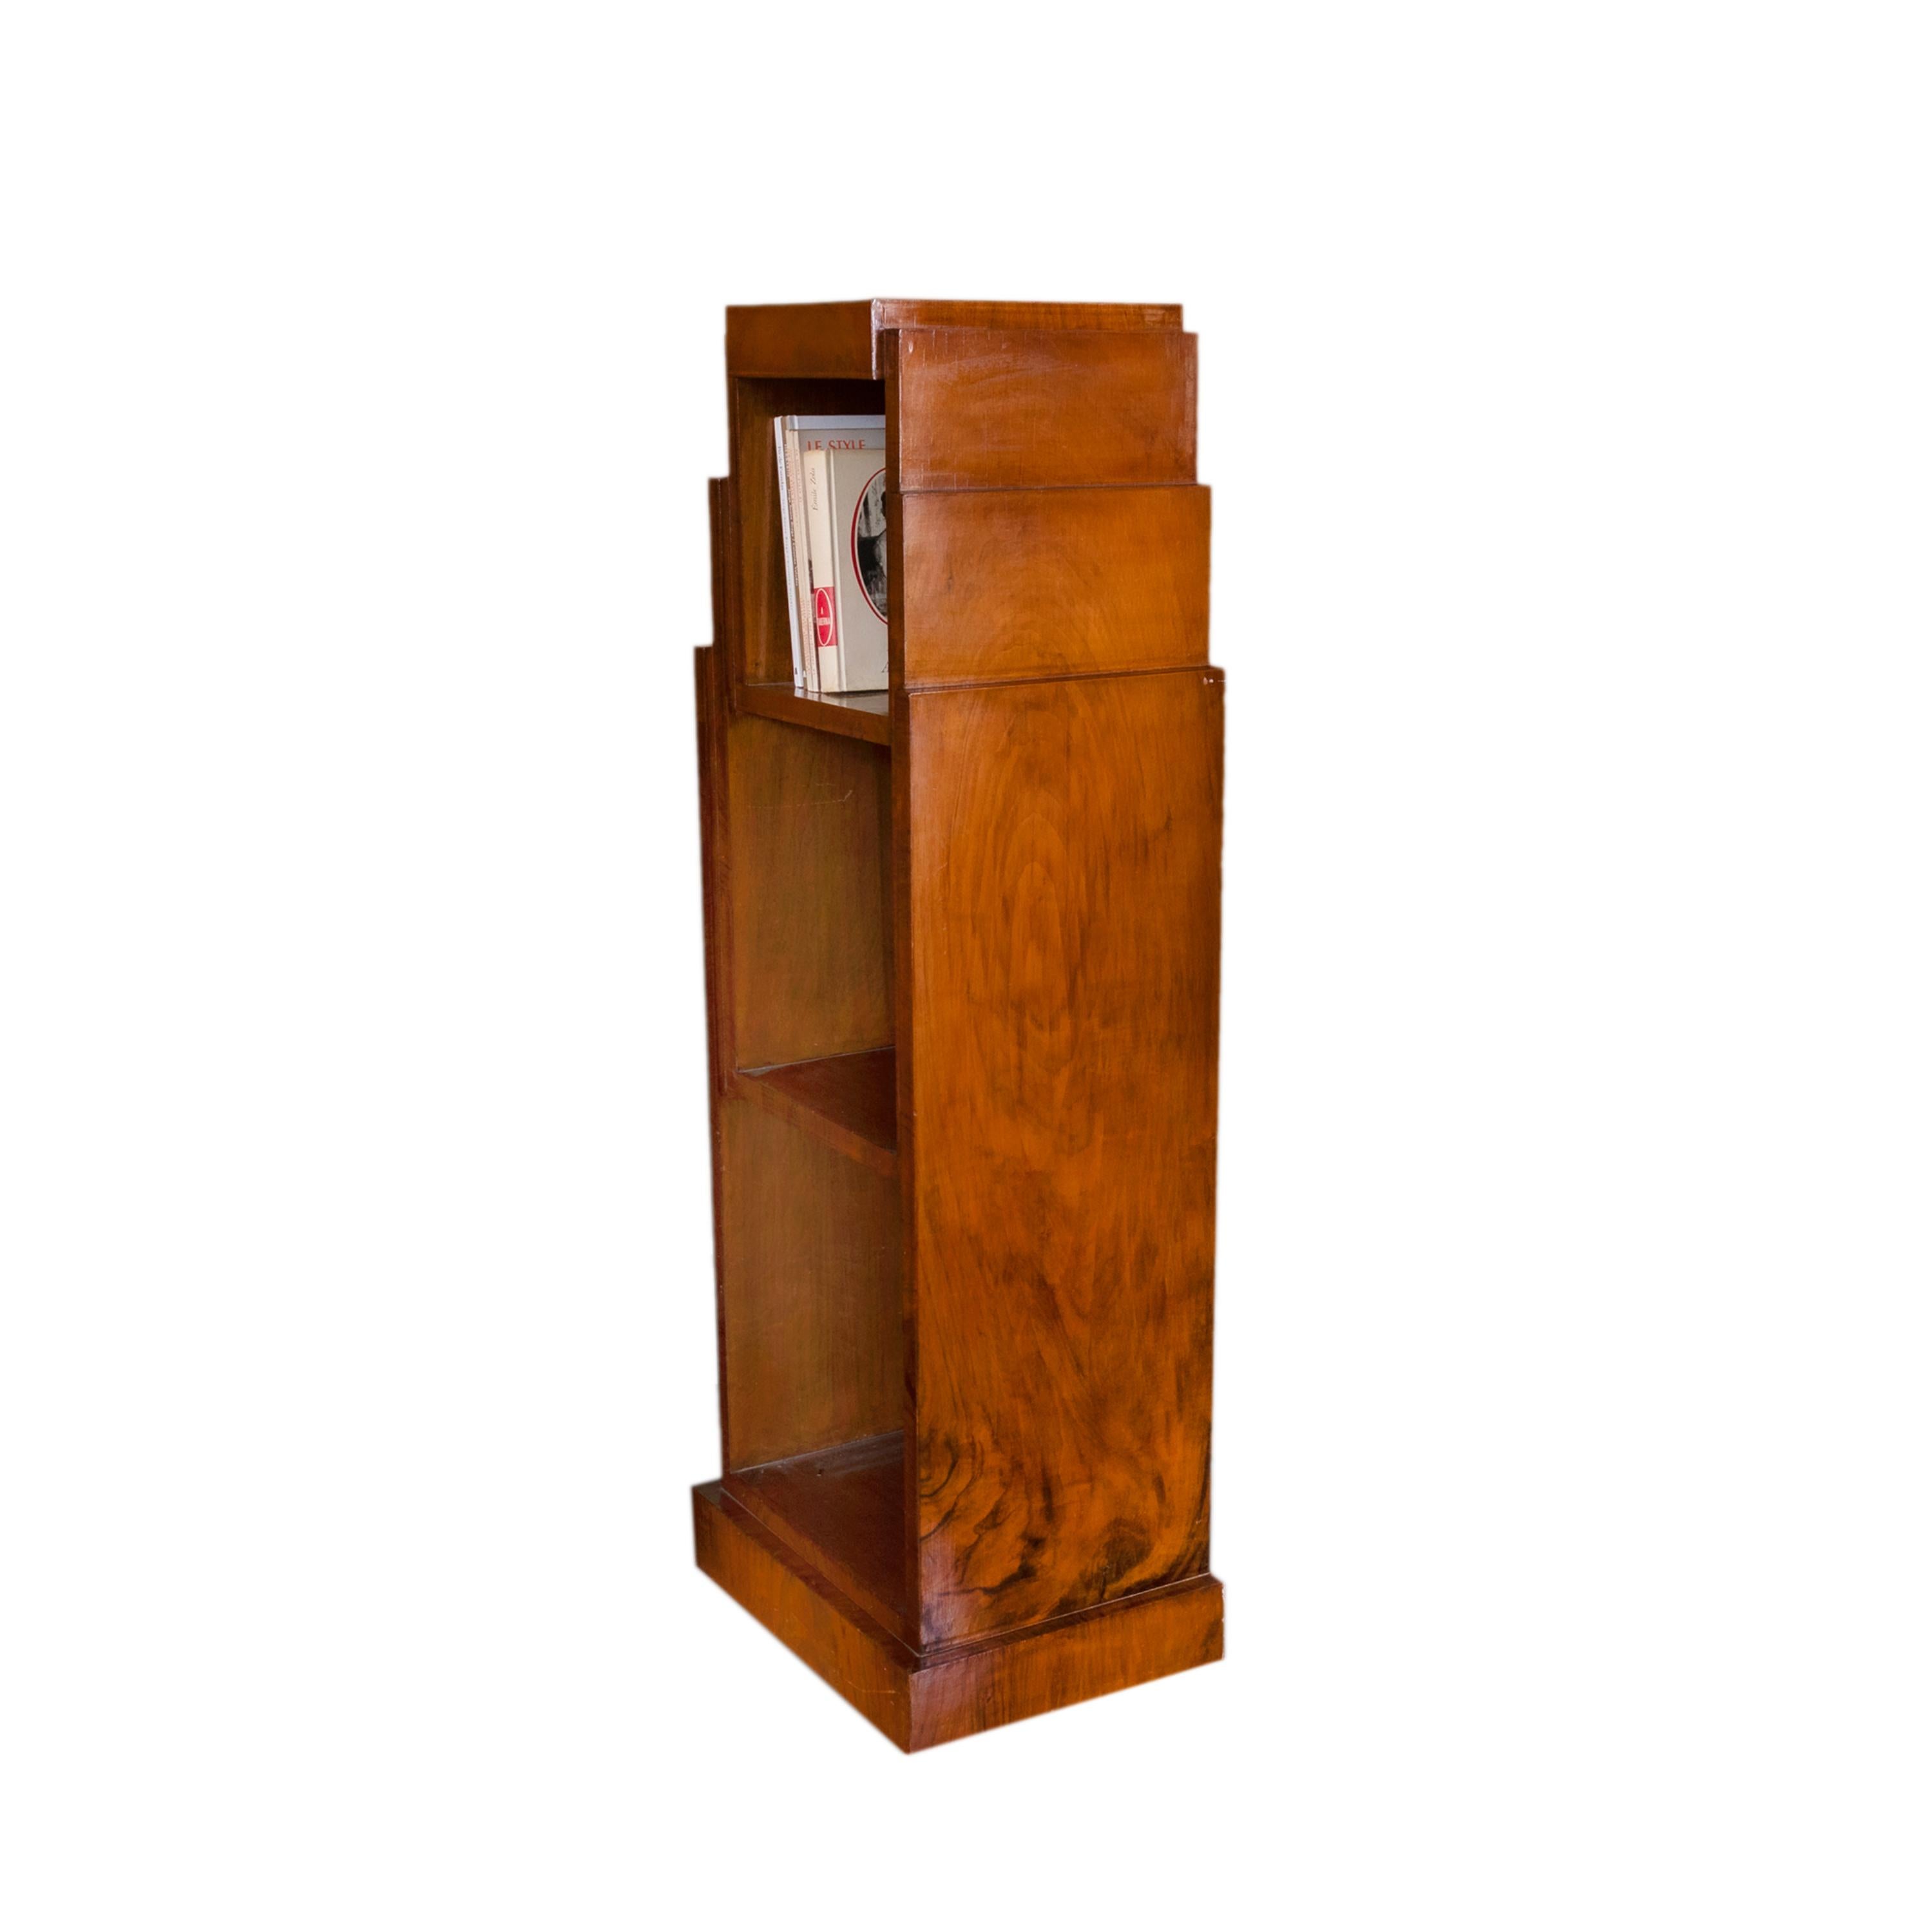 A splendid streamlined form Art Deco tower shape bookcase in walnut with
three divided spaces.

Height 47,24 in (120 cm)
Width 15,35 in (39 cm) 
Depth 11,81 in (30 cm)
